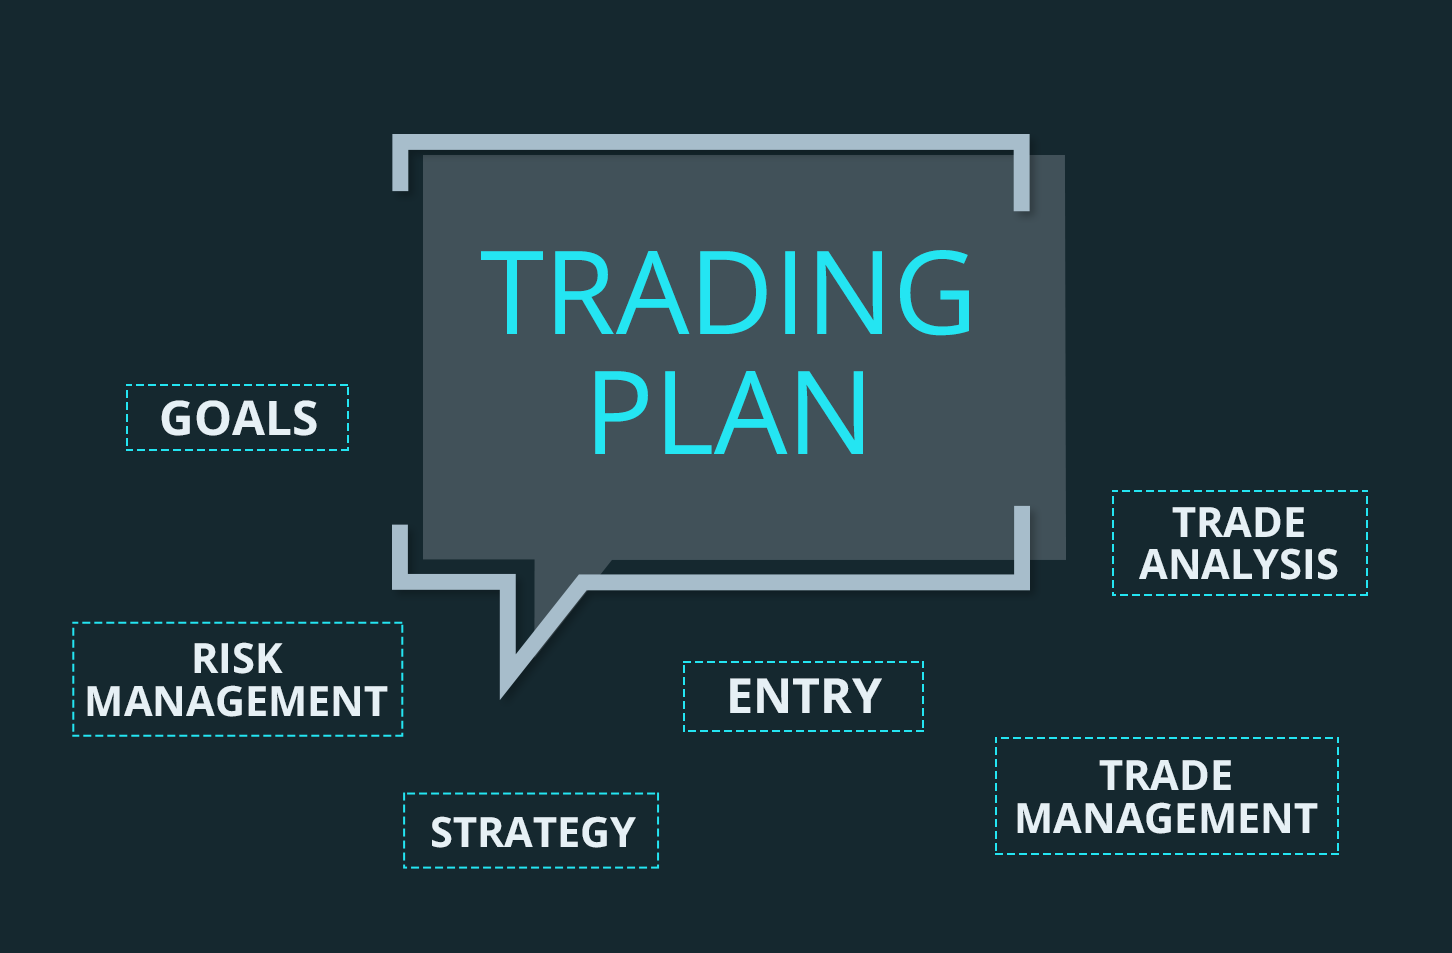 How To Construct and Write Up Forex Trading Plans | Forex ...